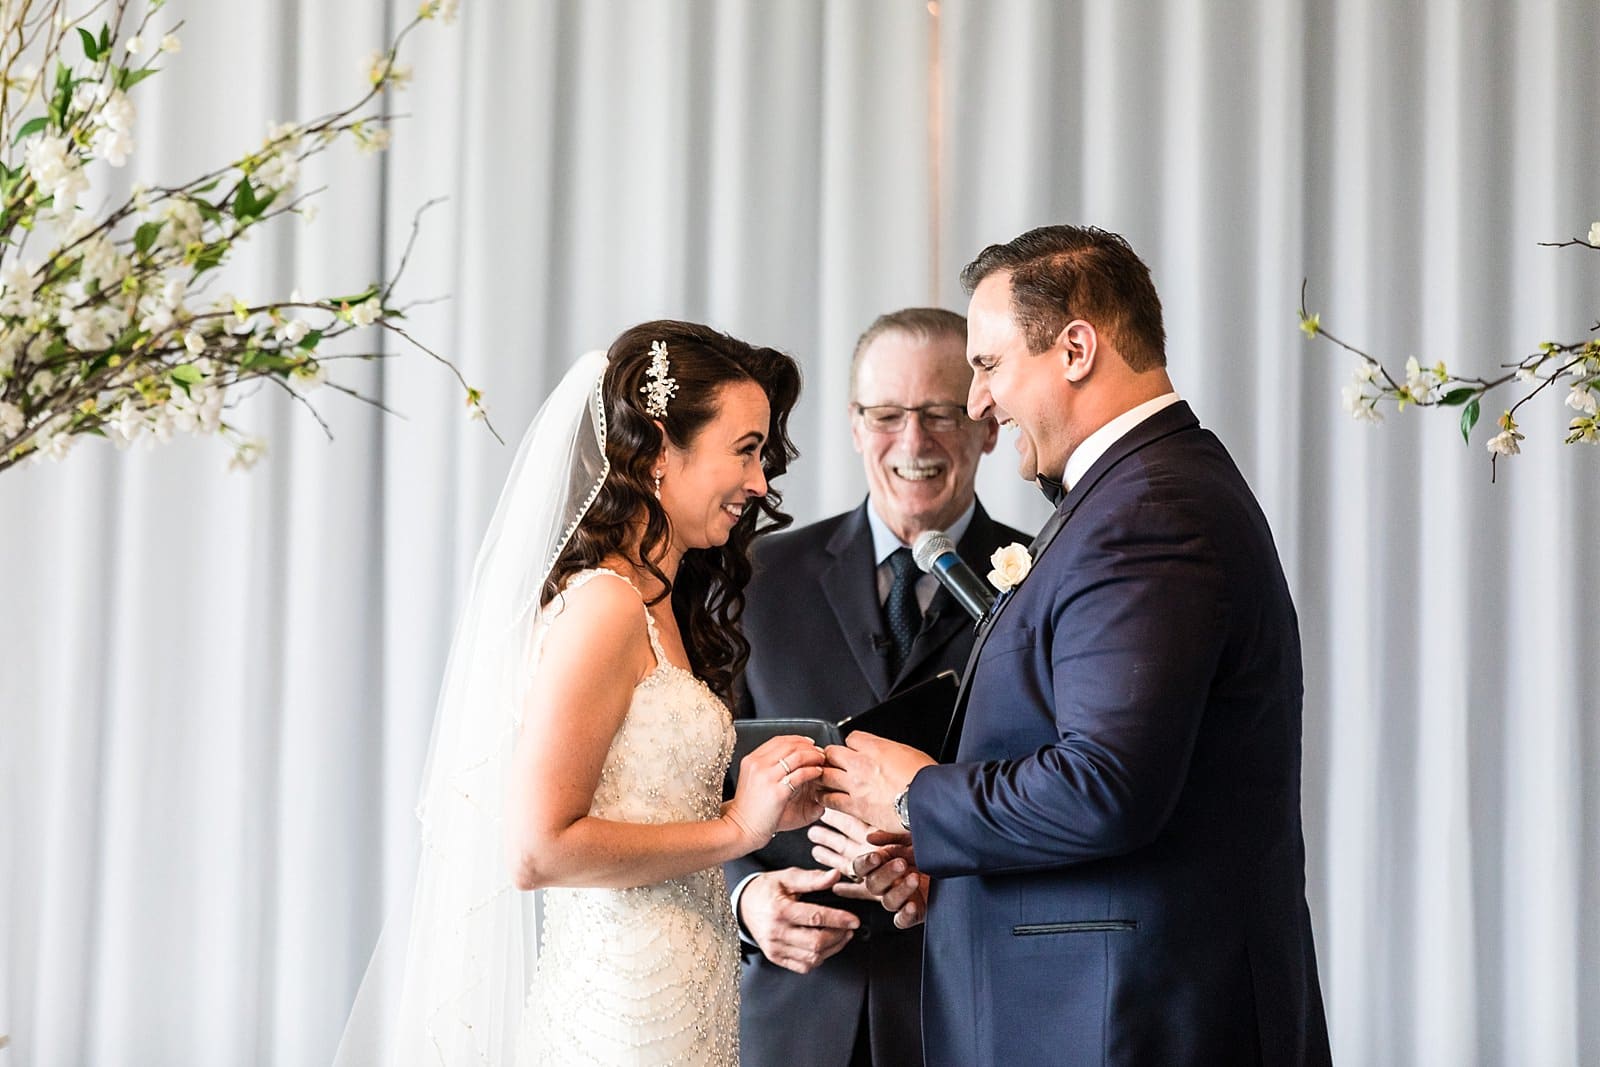 Bride and Groom exchanging rings, wedding ceremony